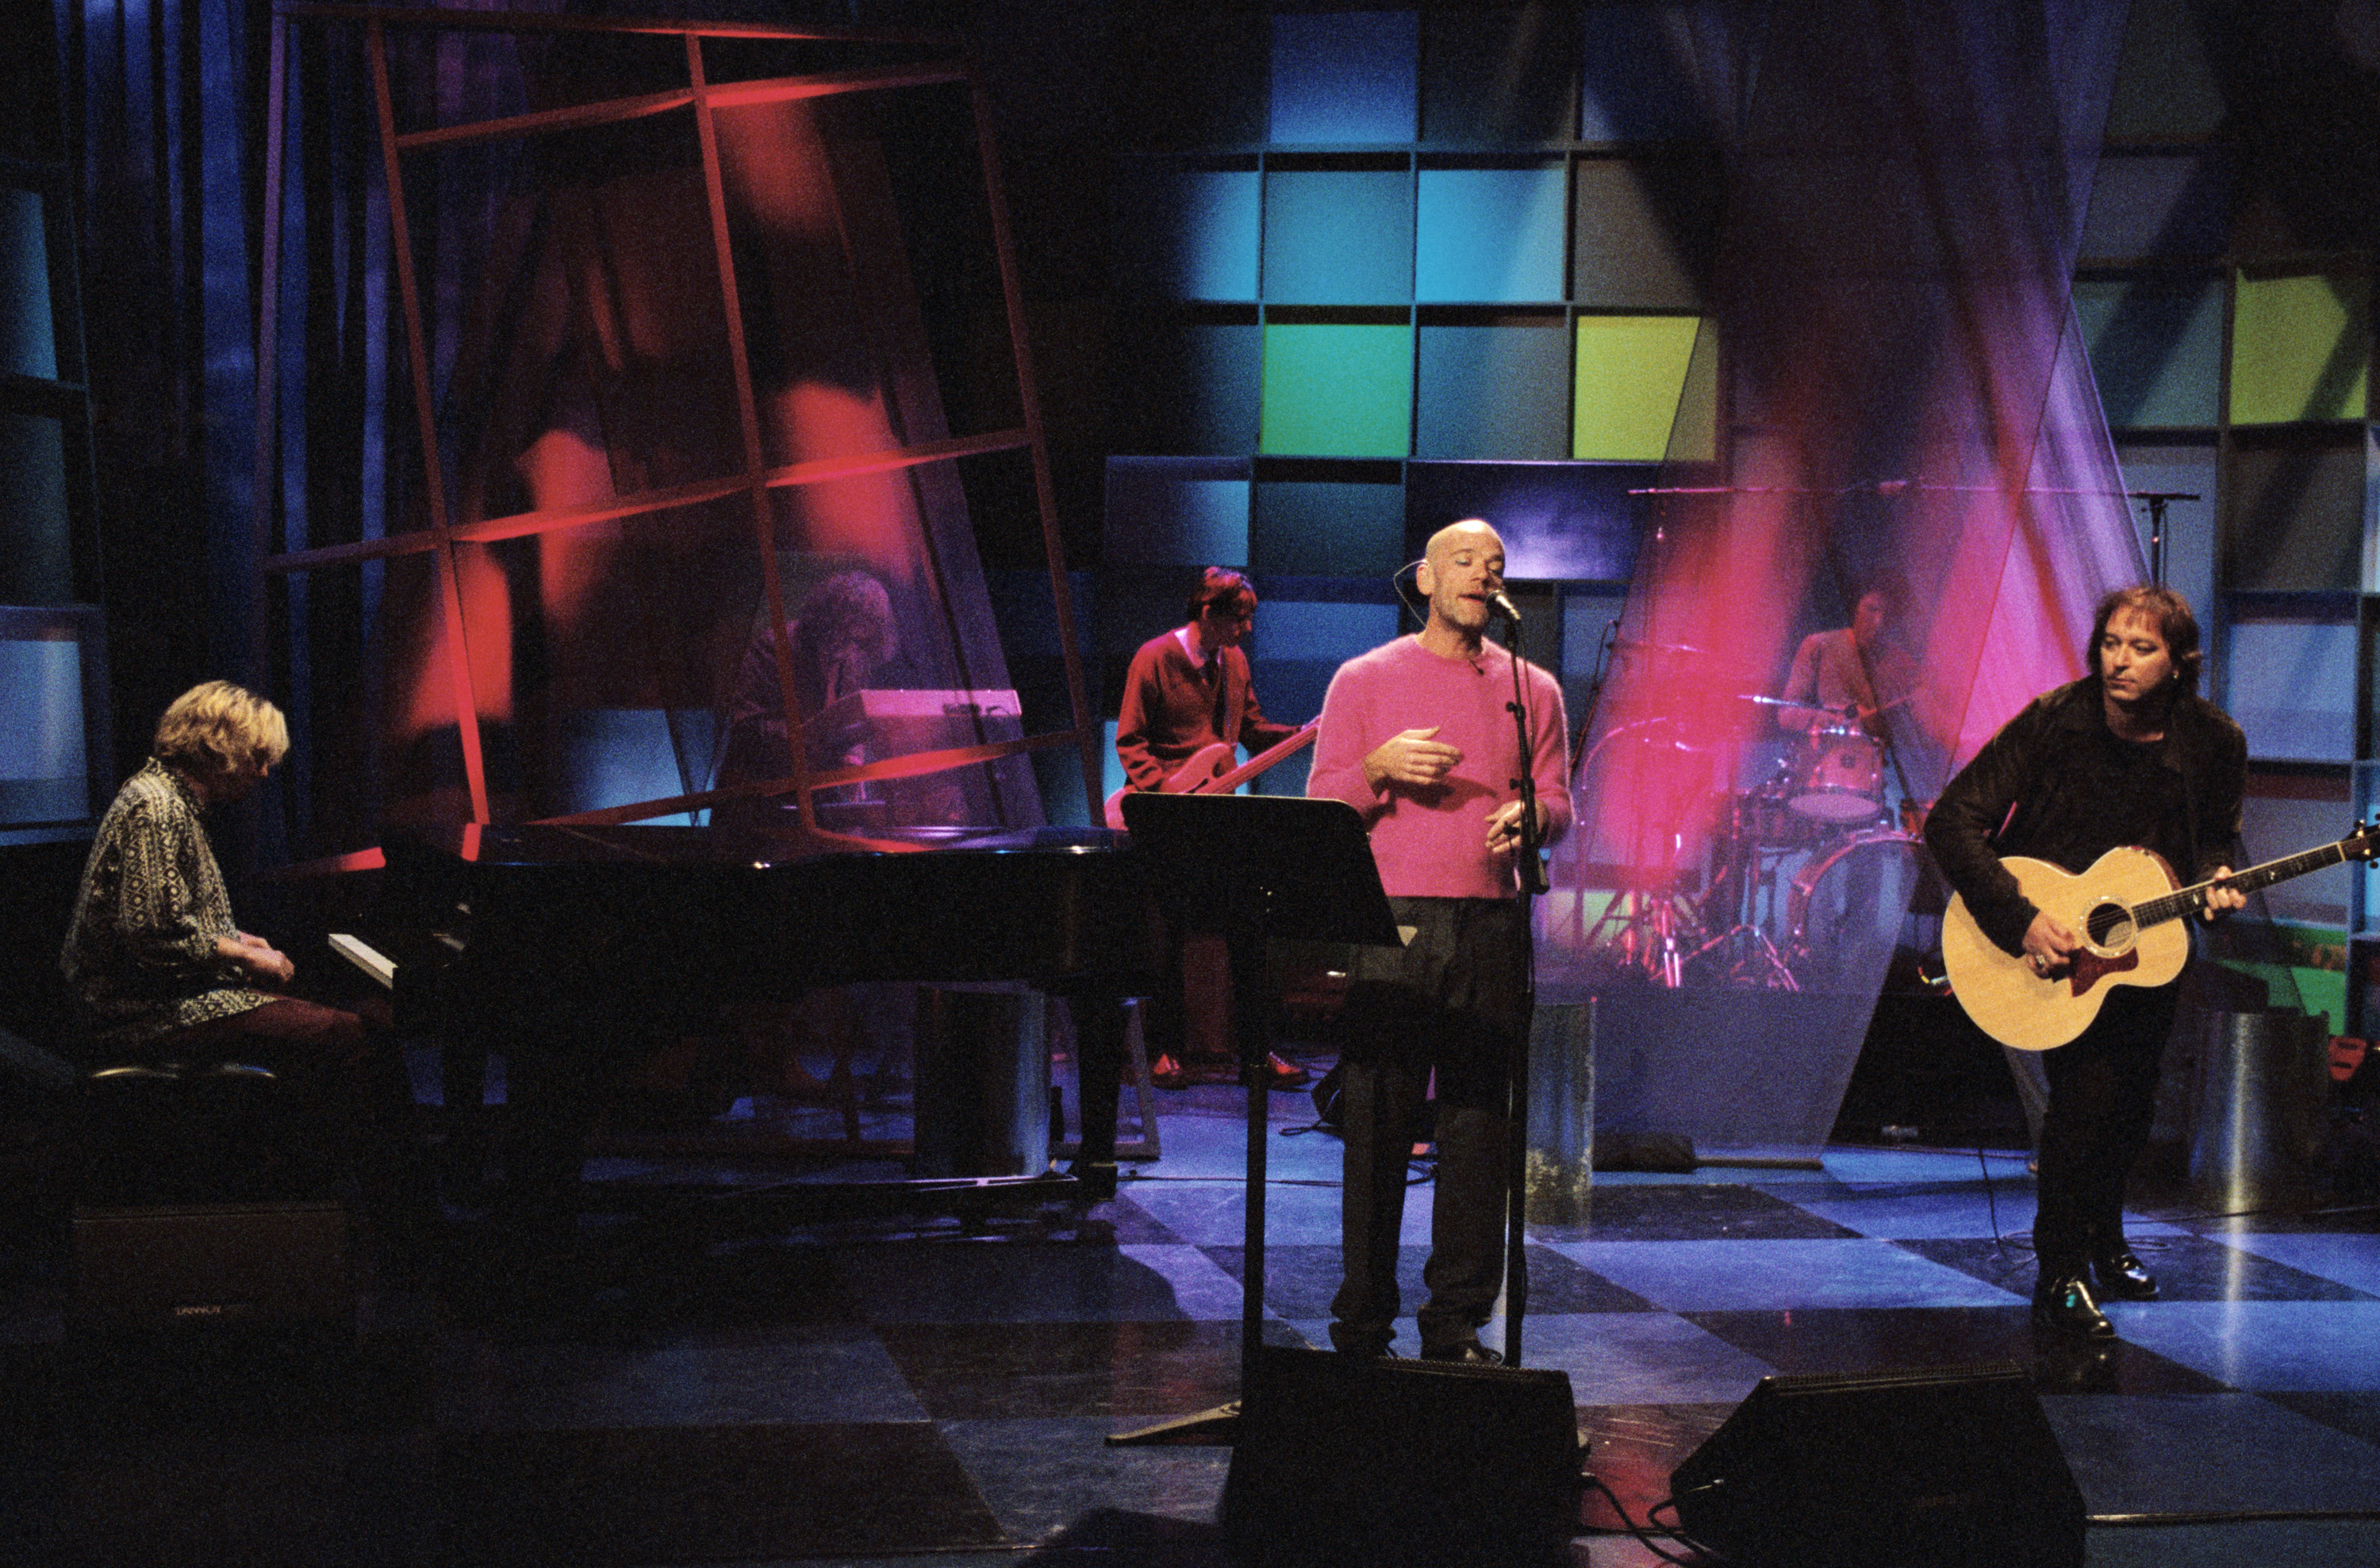 THE TONIGHT SHOW WITH JAY LENO -- Episode 1507 -- Pictured: Musical guest R.E.M. on December 10, 1998  (Photo by Margaret Norton/NBC/NBCU Photo Bank via Getty Images)